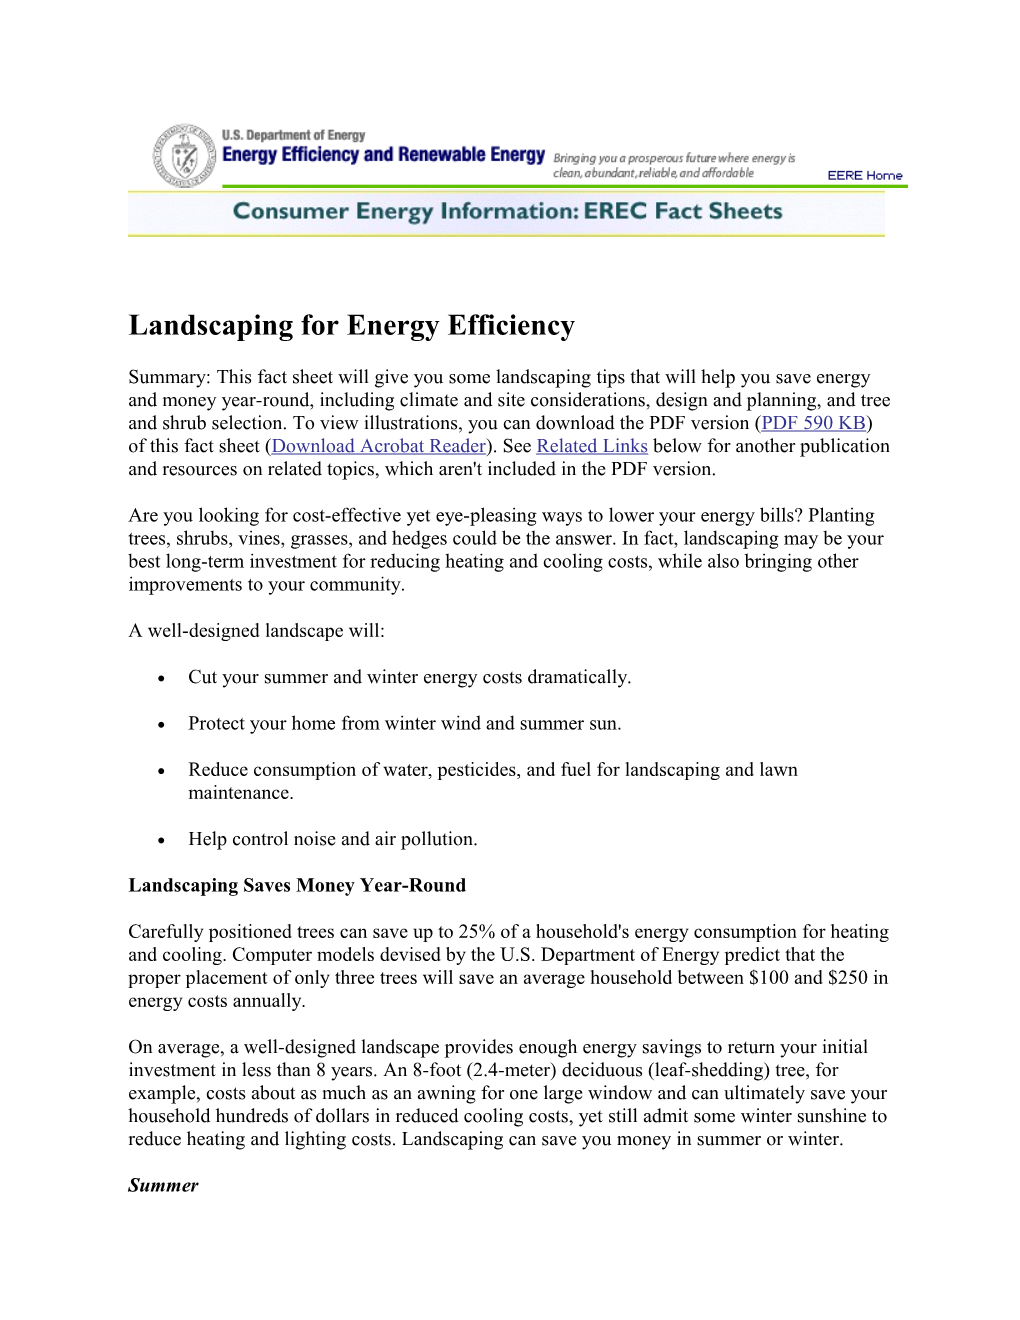 Landscaping for Energy Efficiency